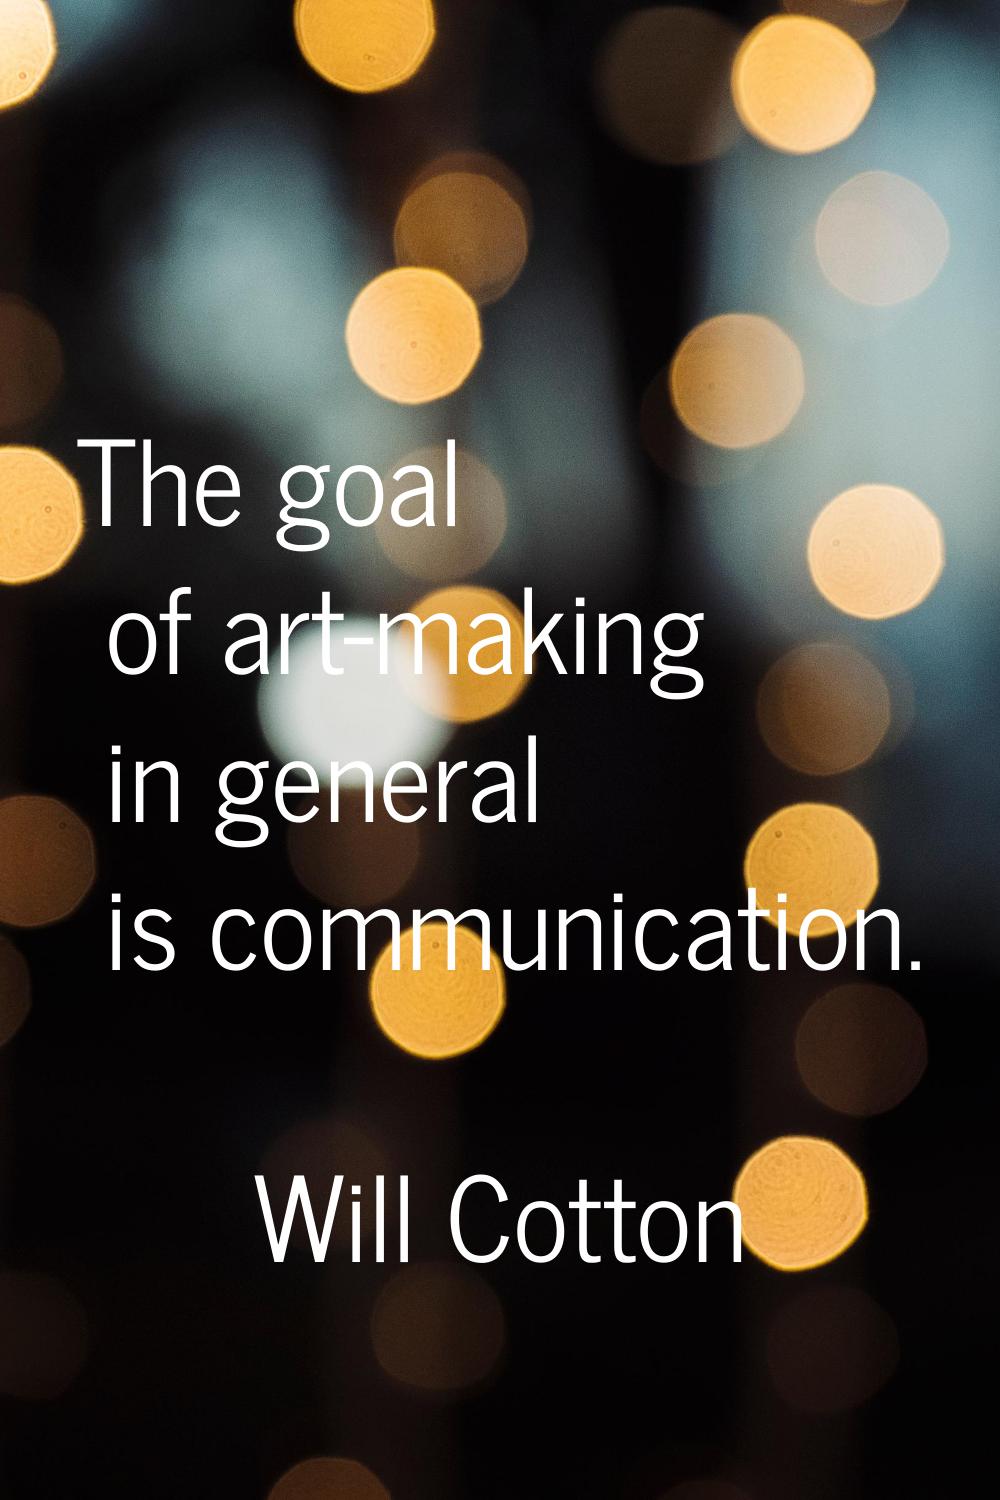 The goal of art-making in general is communication.